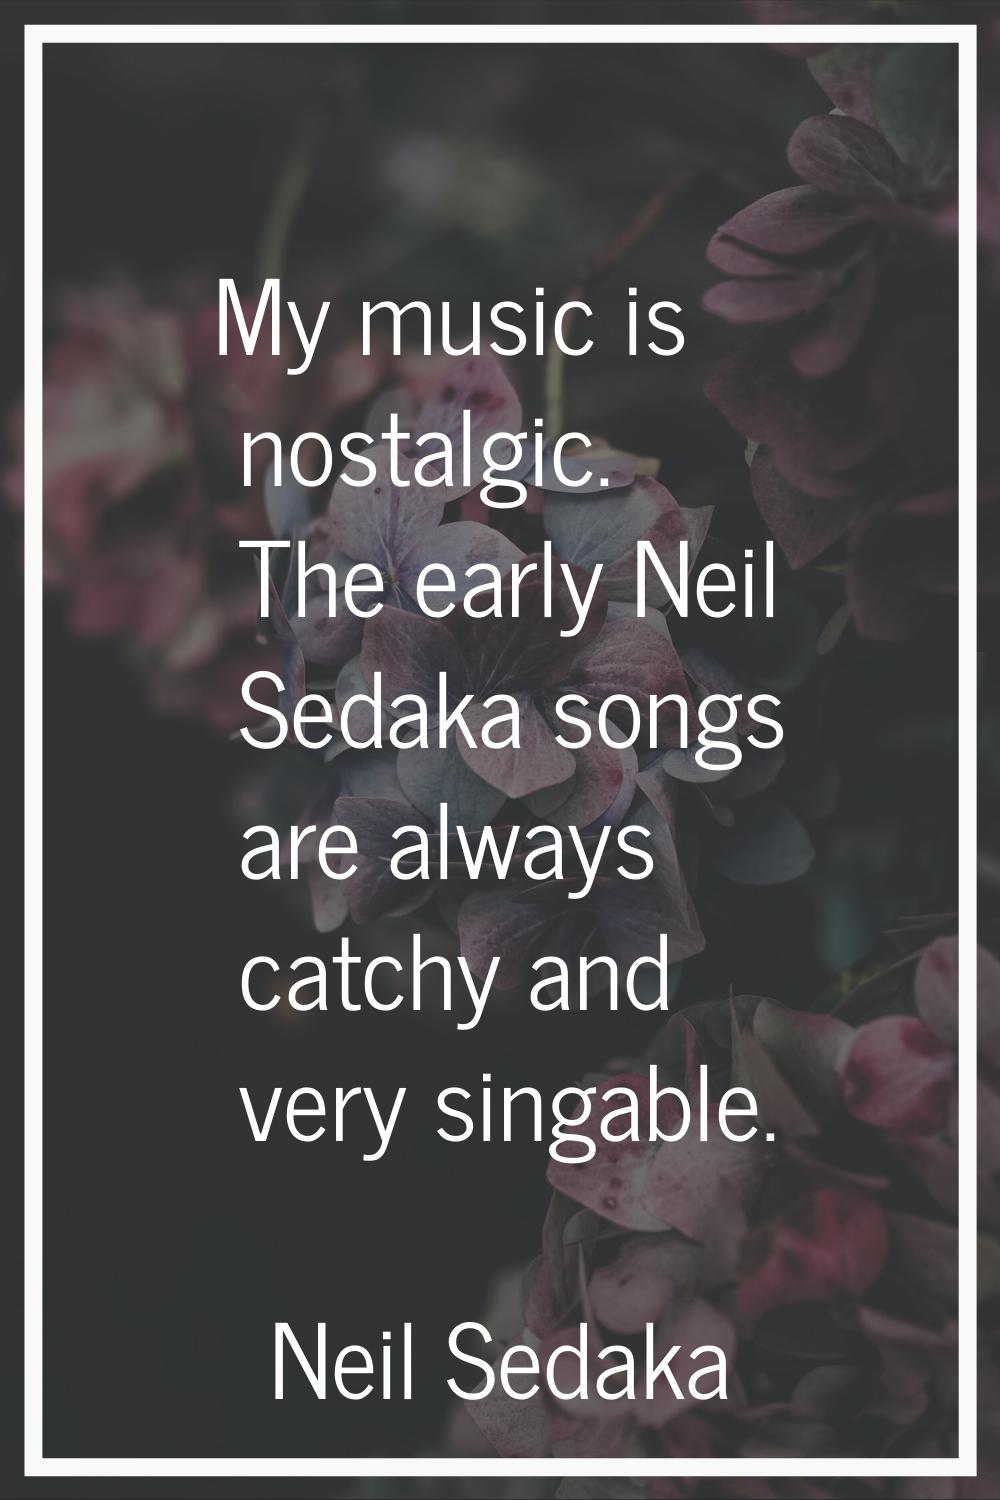 My music is nostalgic. The early Neil Sedaka songs are always catchy and very singable.